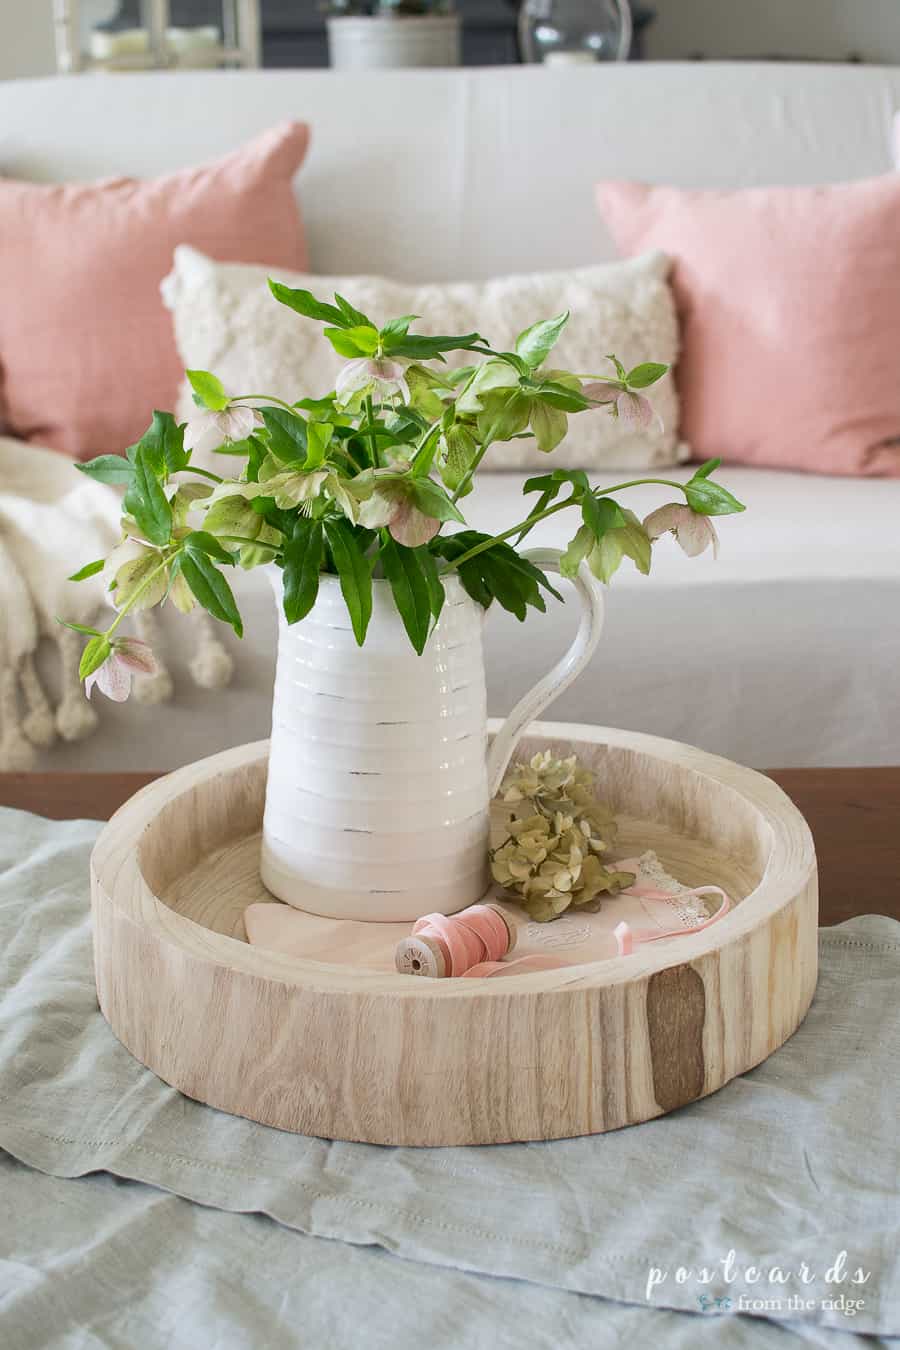 Lenten roses in a white pitcher on a round wood tray